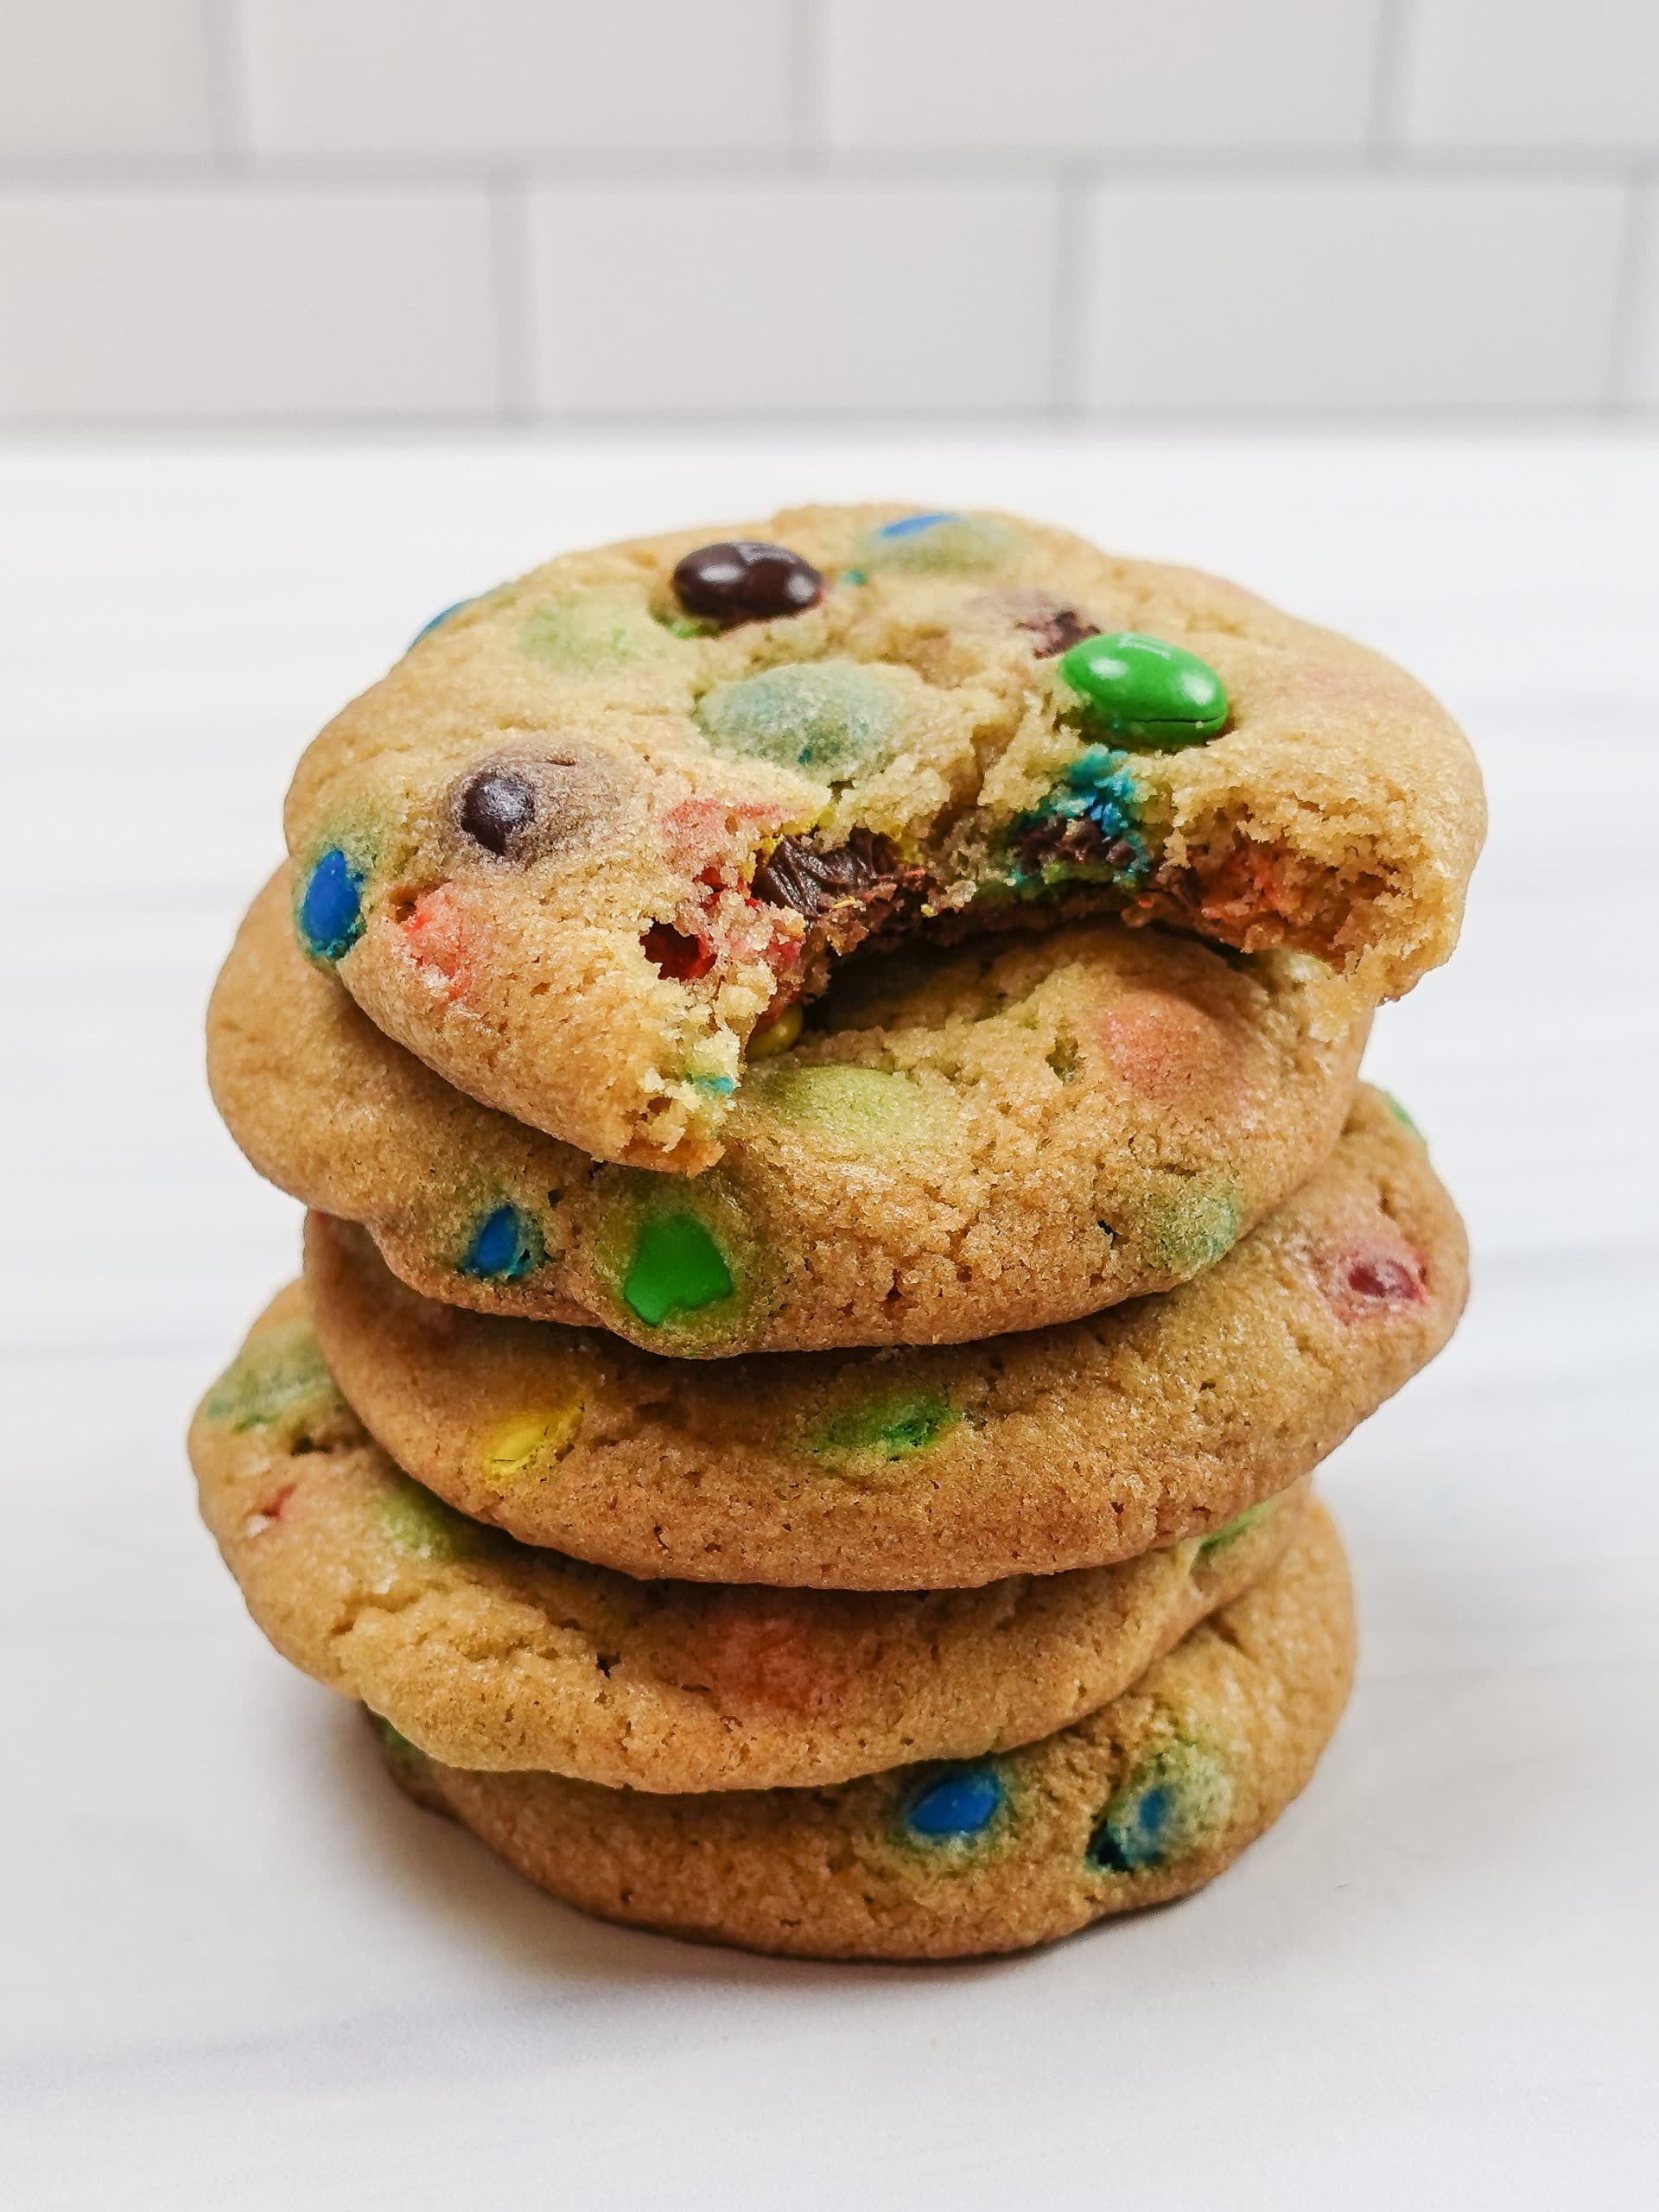 Soft and Chewy M&M Cookies - Parsley and Icing